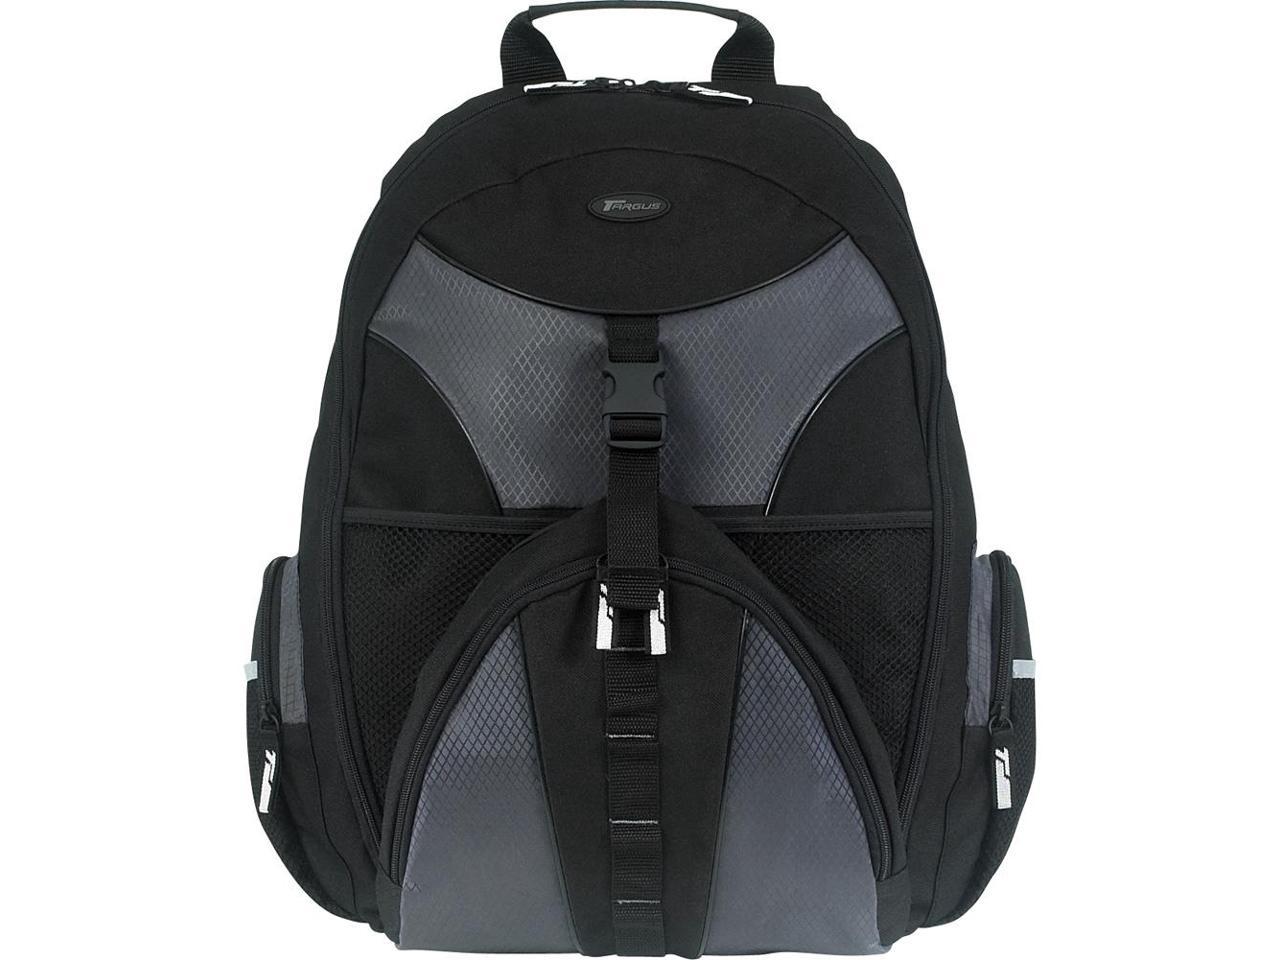 Black Sports Daypack and College Backpack for Travel Black Targus Sports Backpack for 15.6-Inch Laptop TSB007US